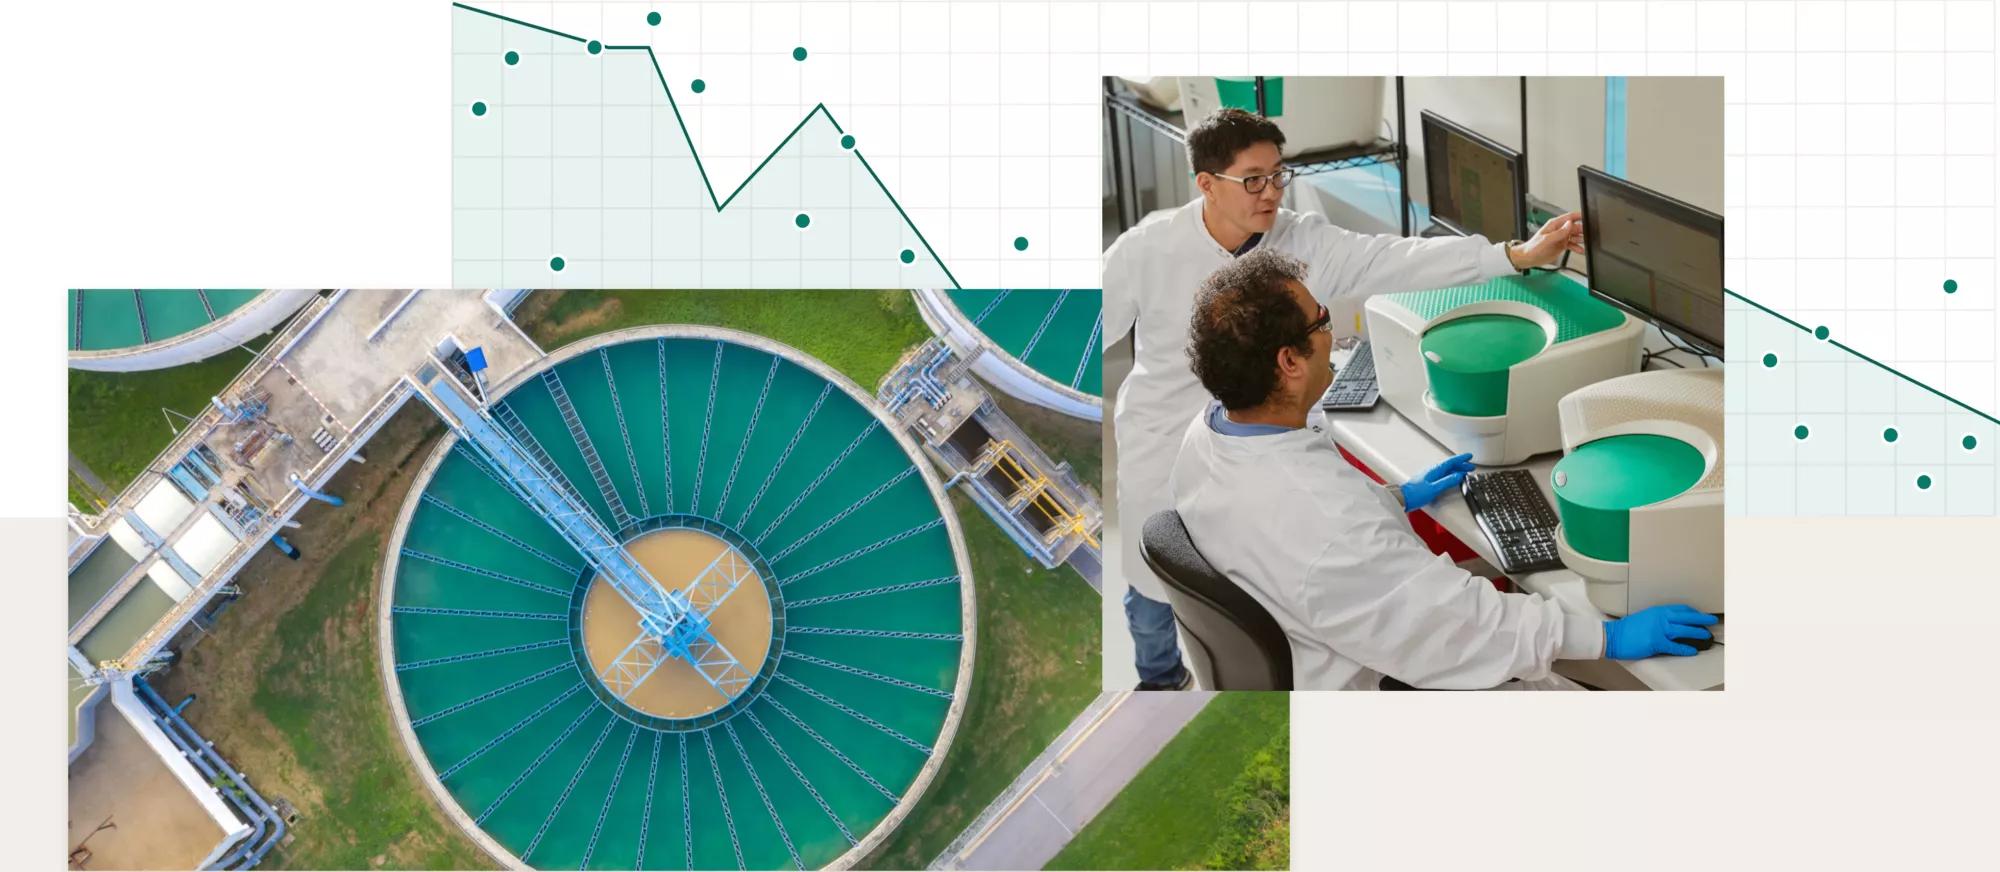 Collage of images depicting wastewater-based epidemiology laboratory science and lower trends in viral and fungal infectious-disease amongst communities.